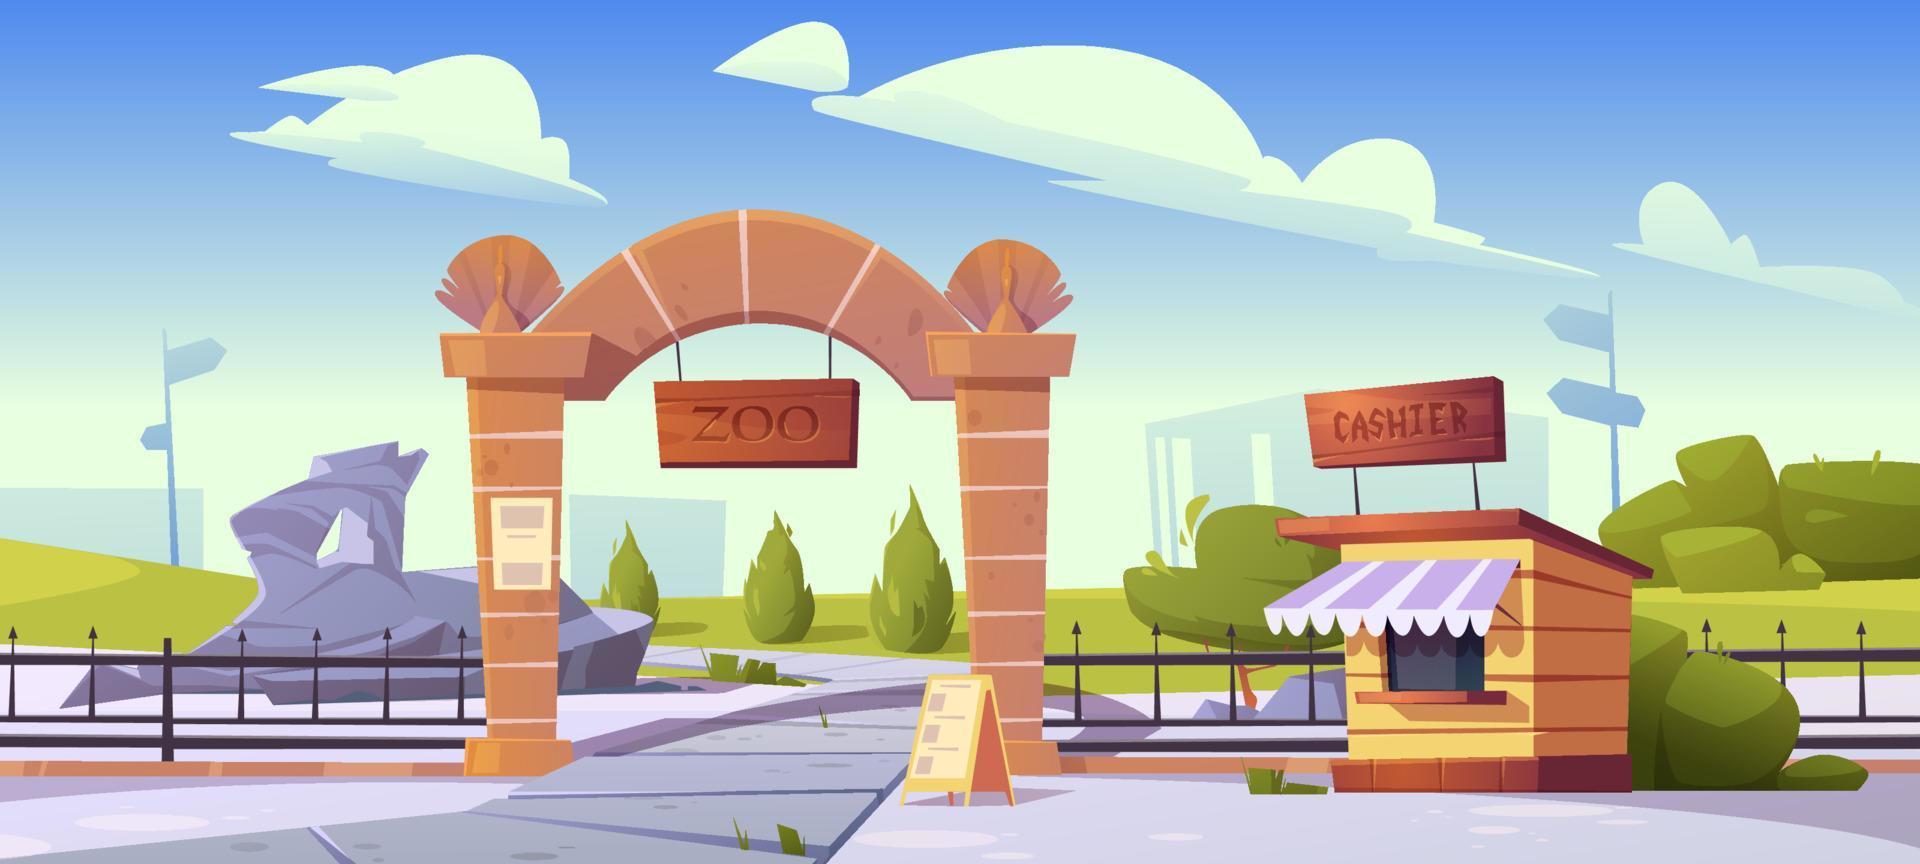 Zoo entrance with stone arch and cashier booth vector